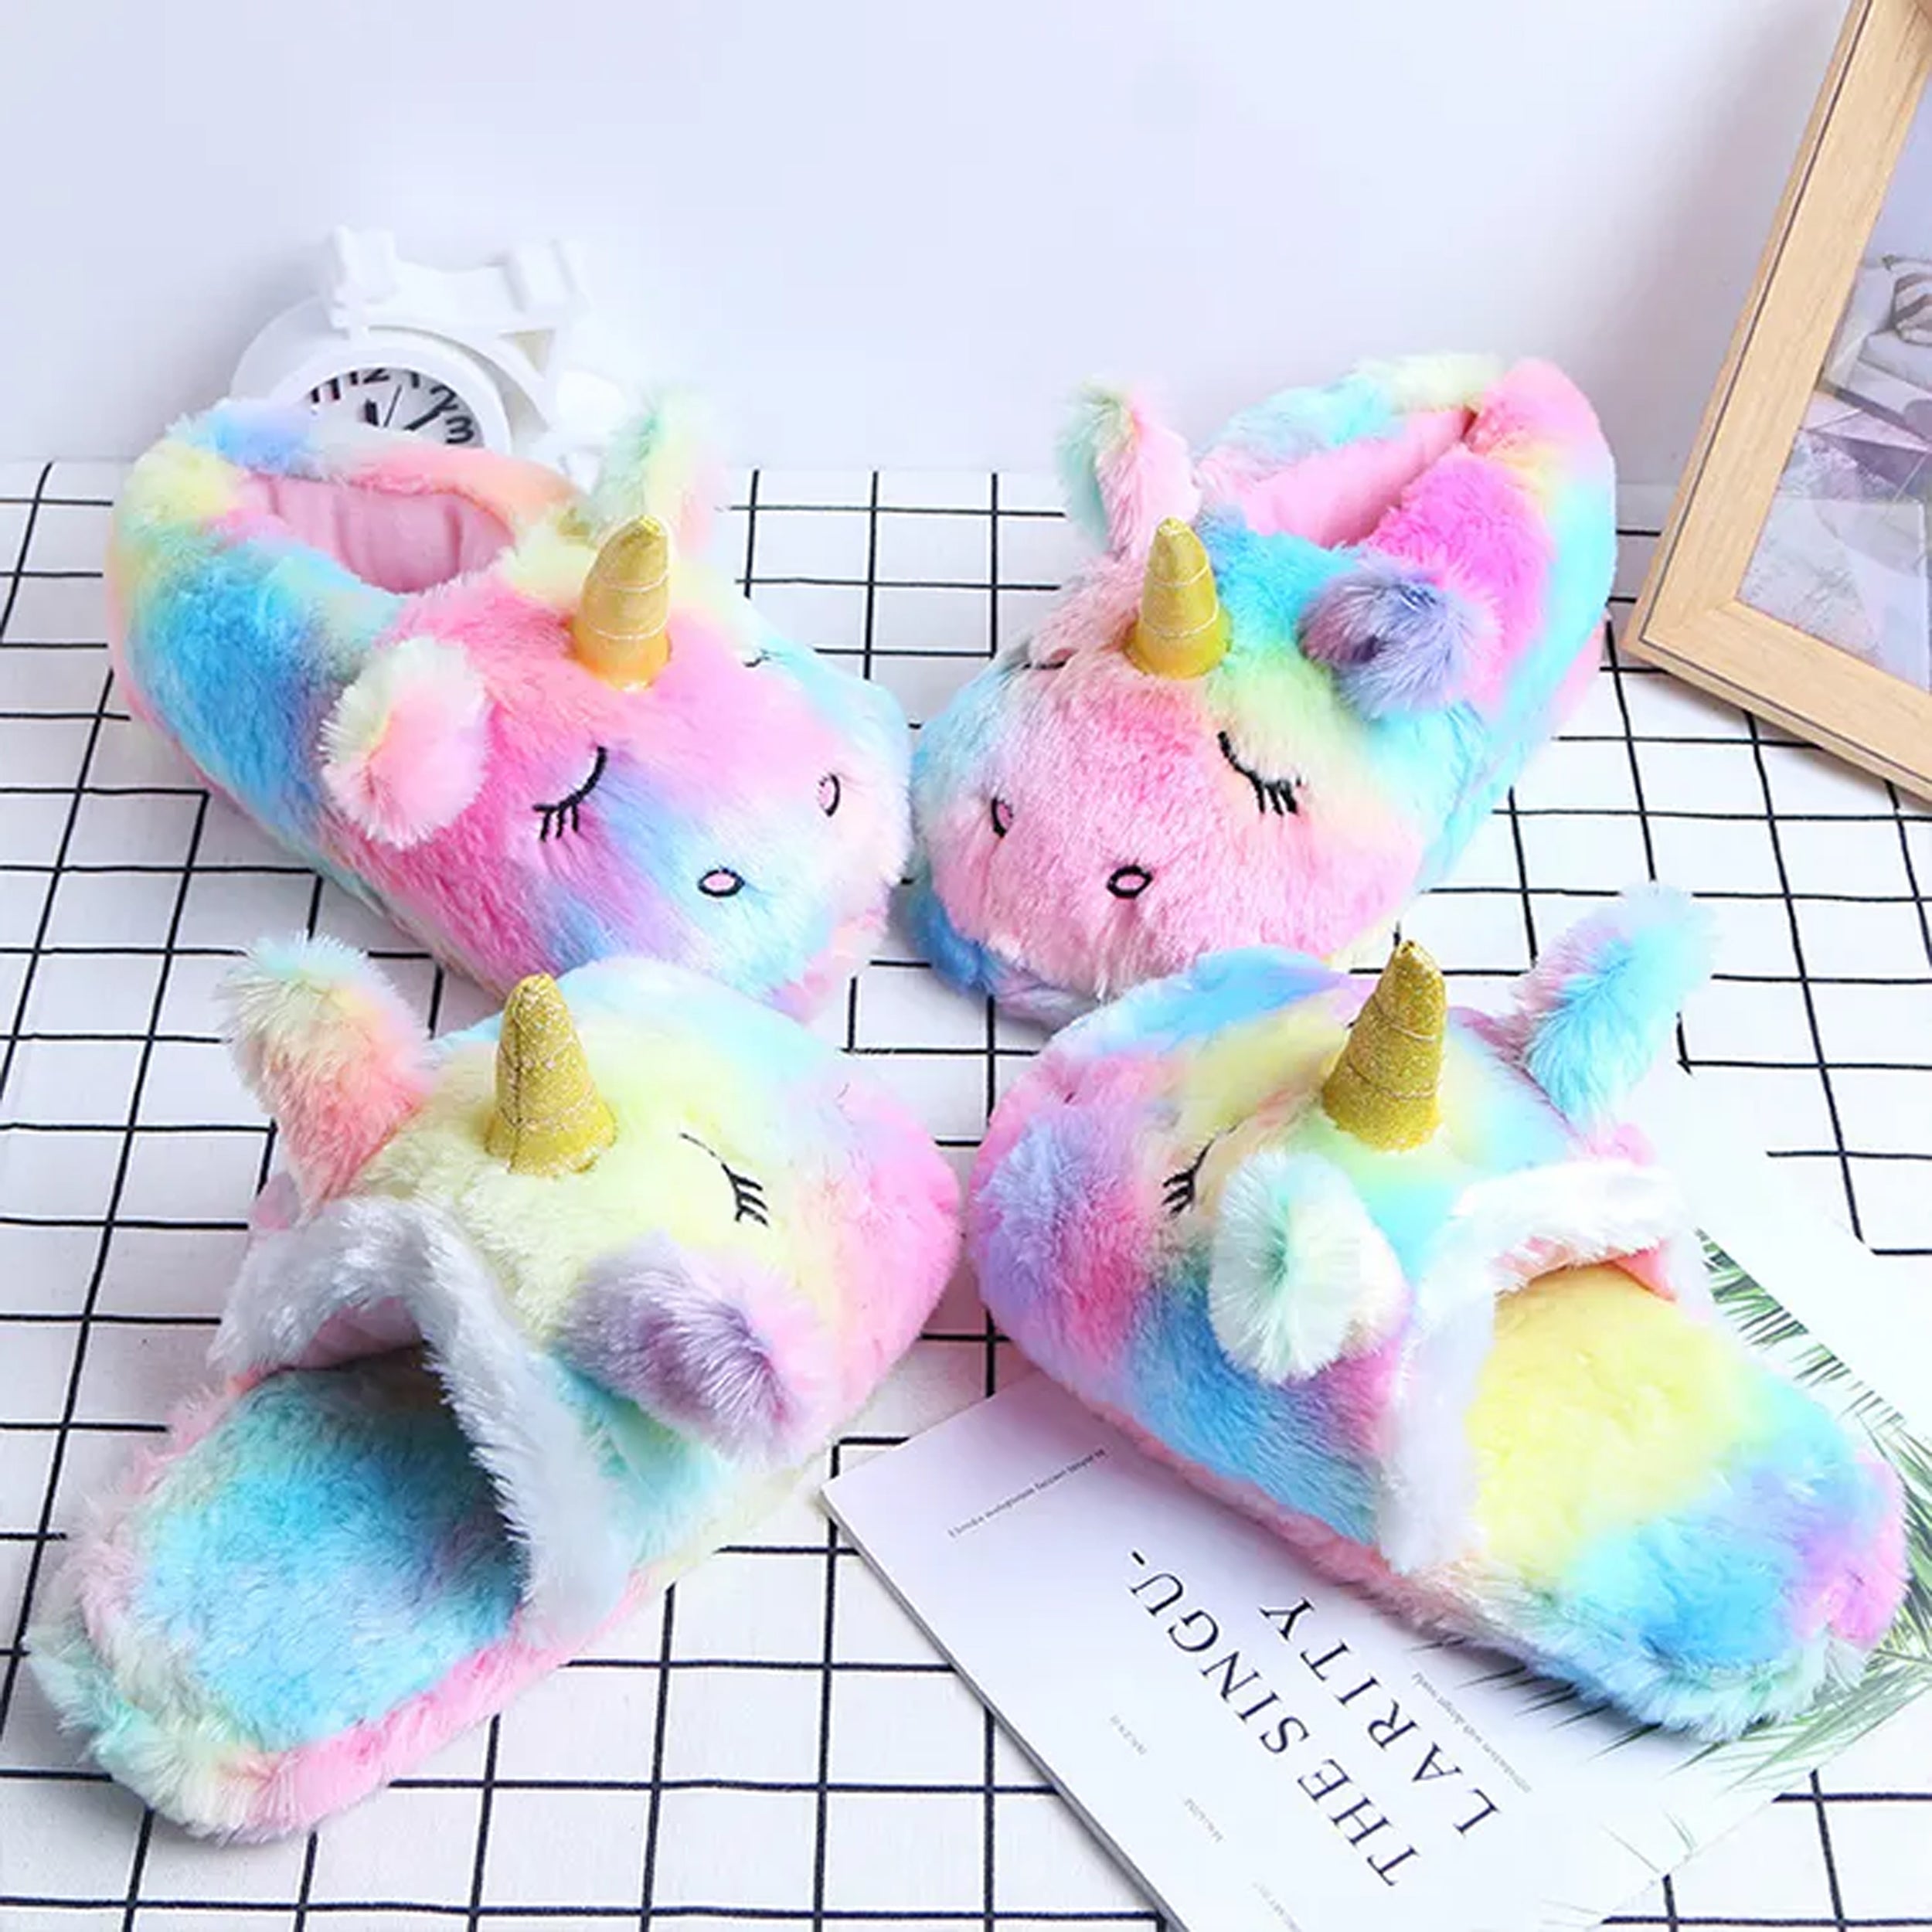 Rainbow Fluffy Fur Unicorn Animal with Sequins Plush Slippers - Perfect Gift for Girls and Kids